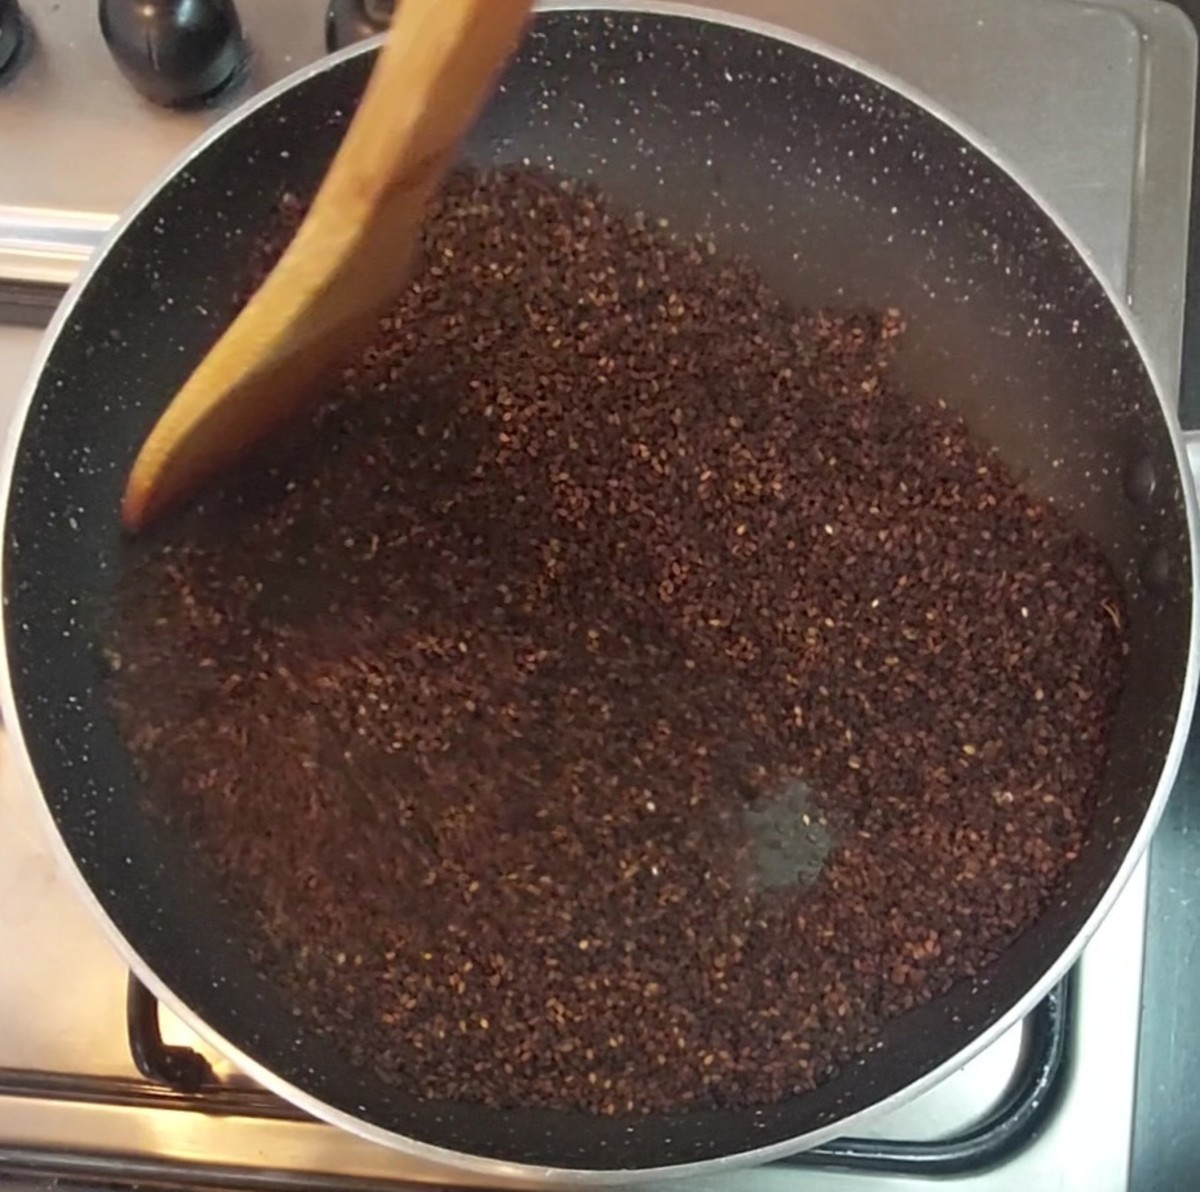 In a frying pan, add 1 cup of black sesame seeds. Fry over medium flame for 5 minutes or till aromatic. Transfer to a plate.